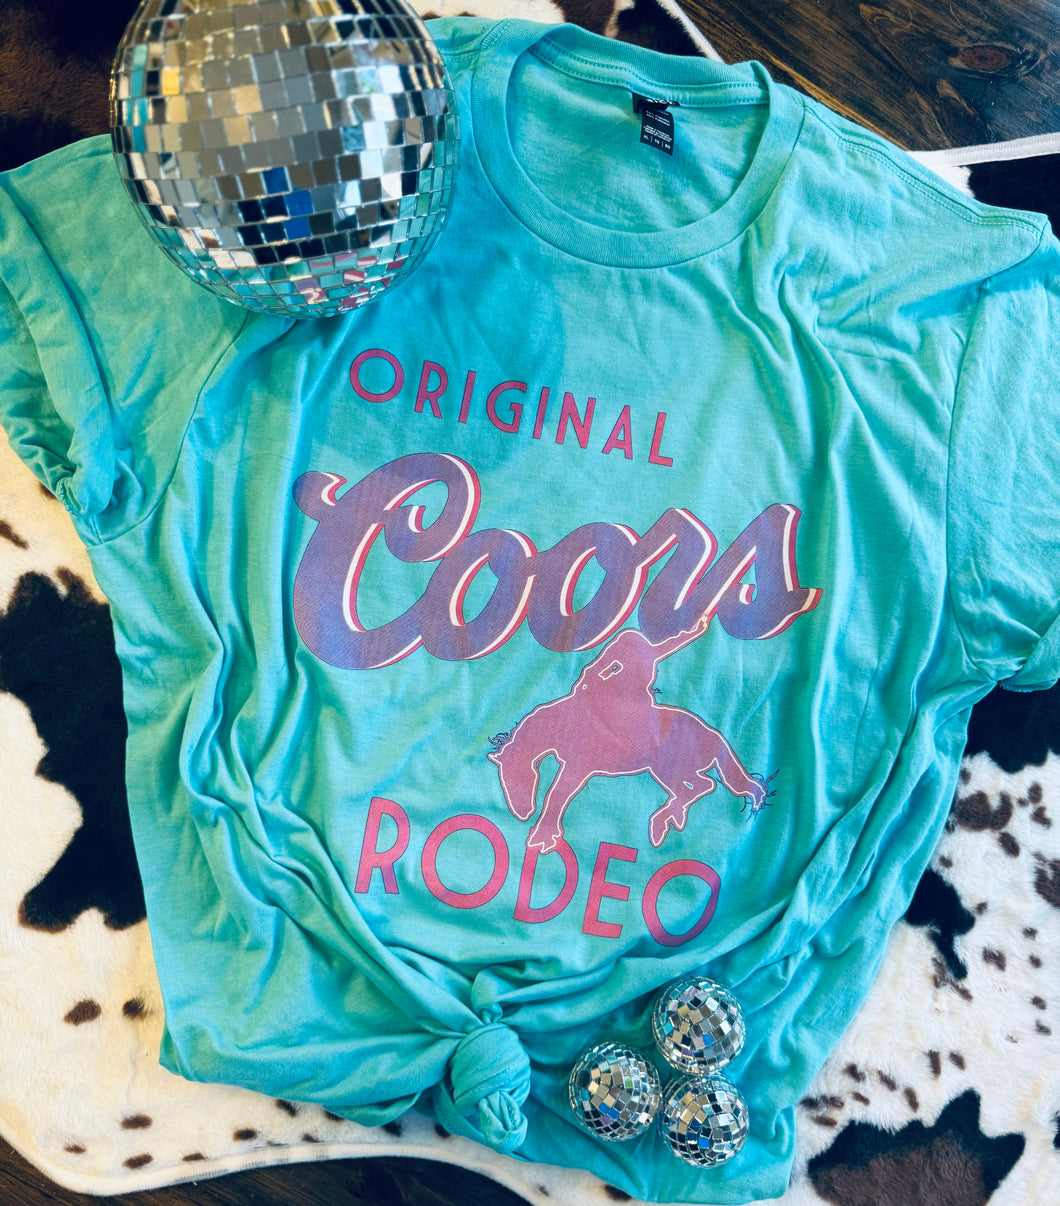 Turquoise with pink The Original Coors Rodeo western graphic tee - Mavictoria Designs Hot Press Express